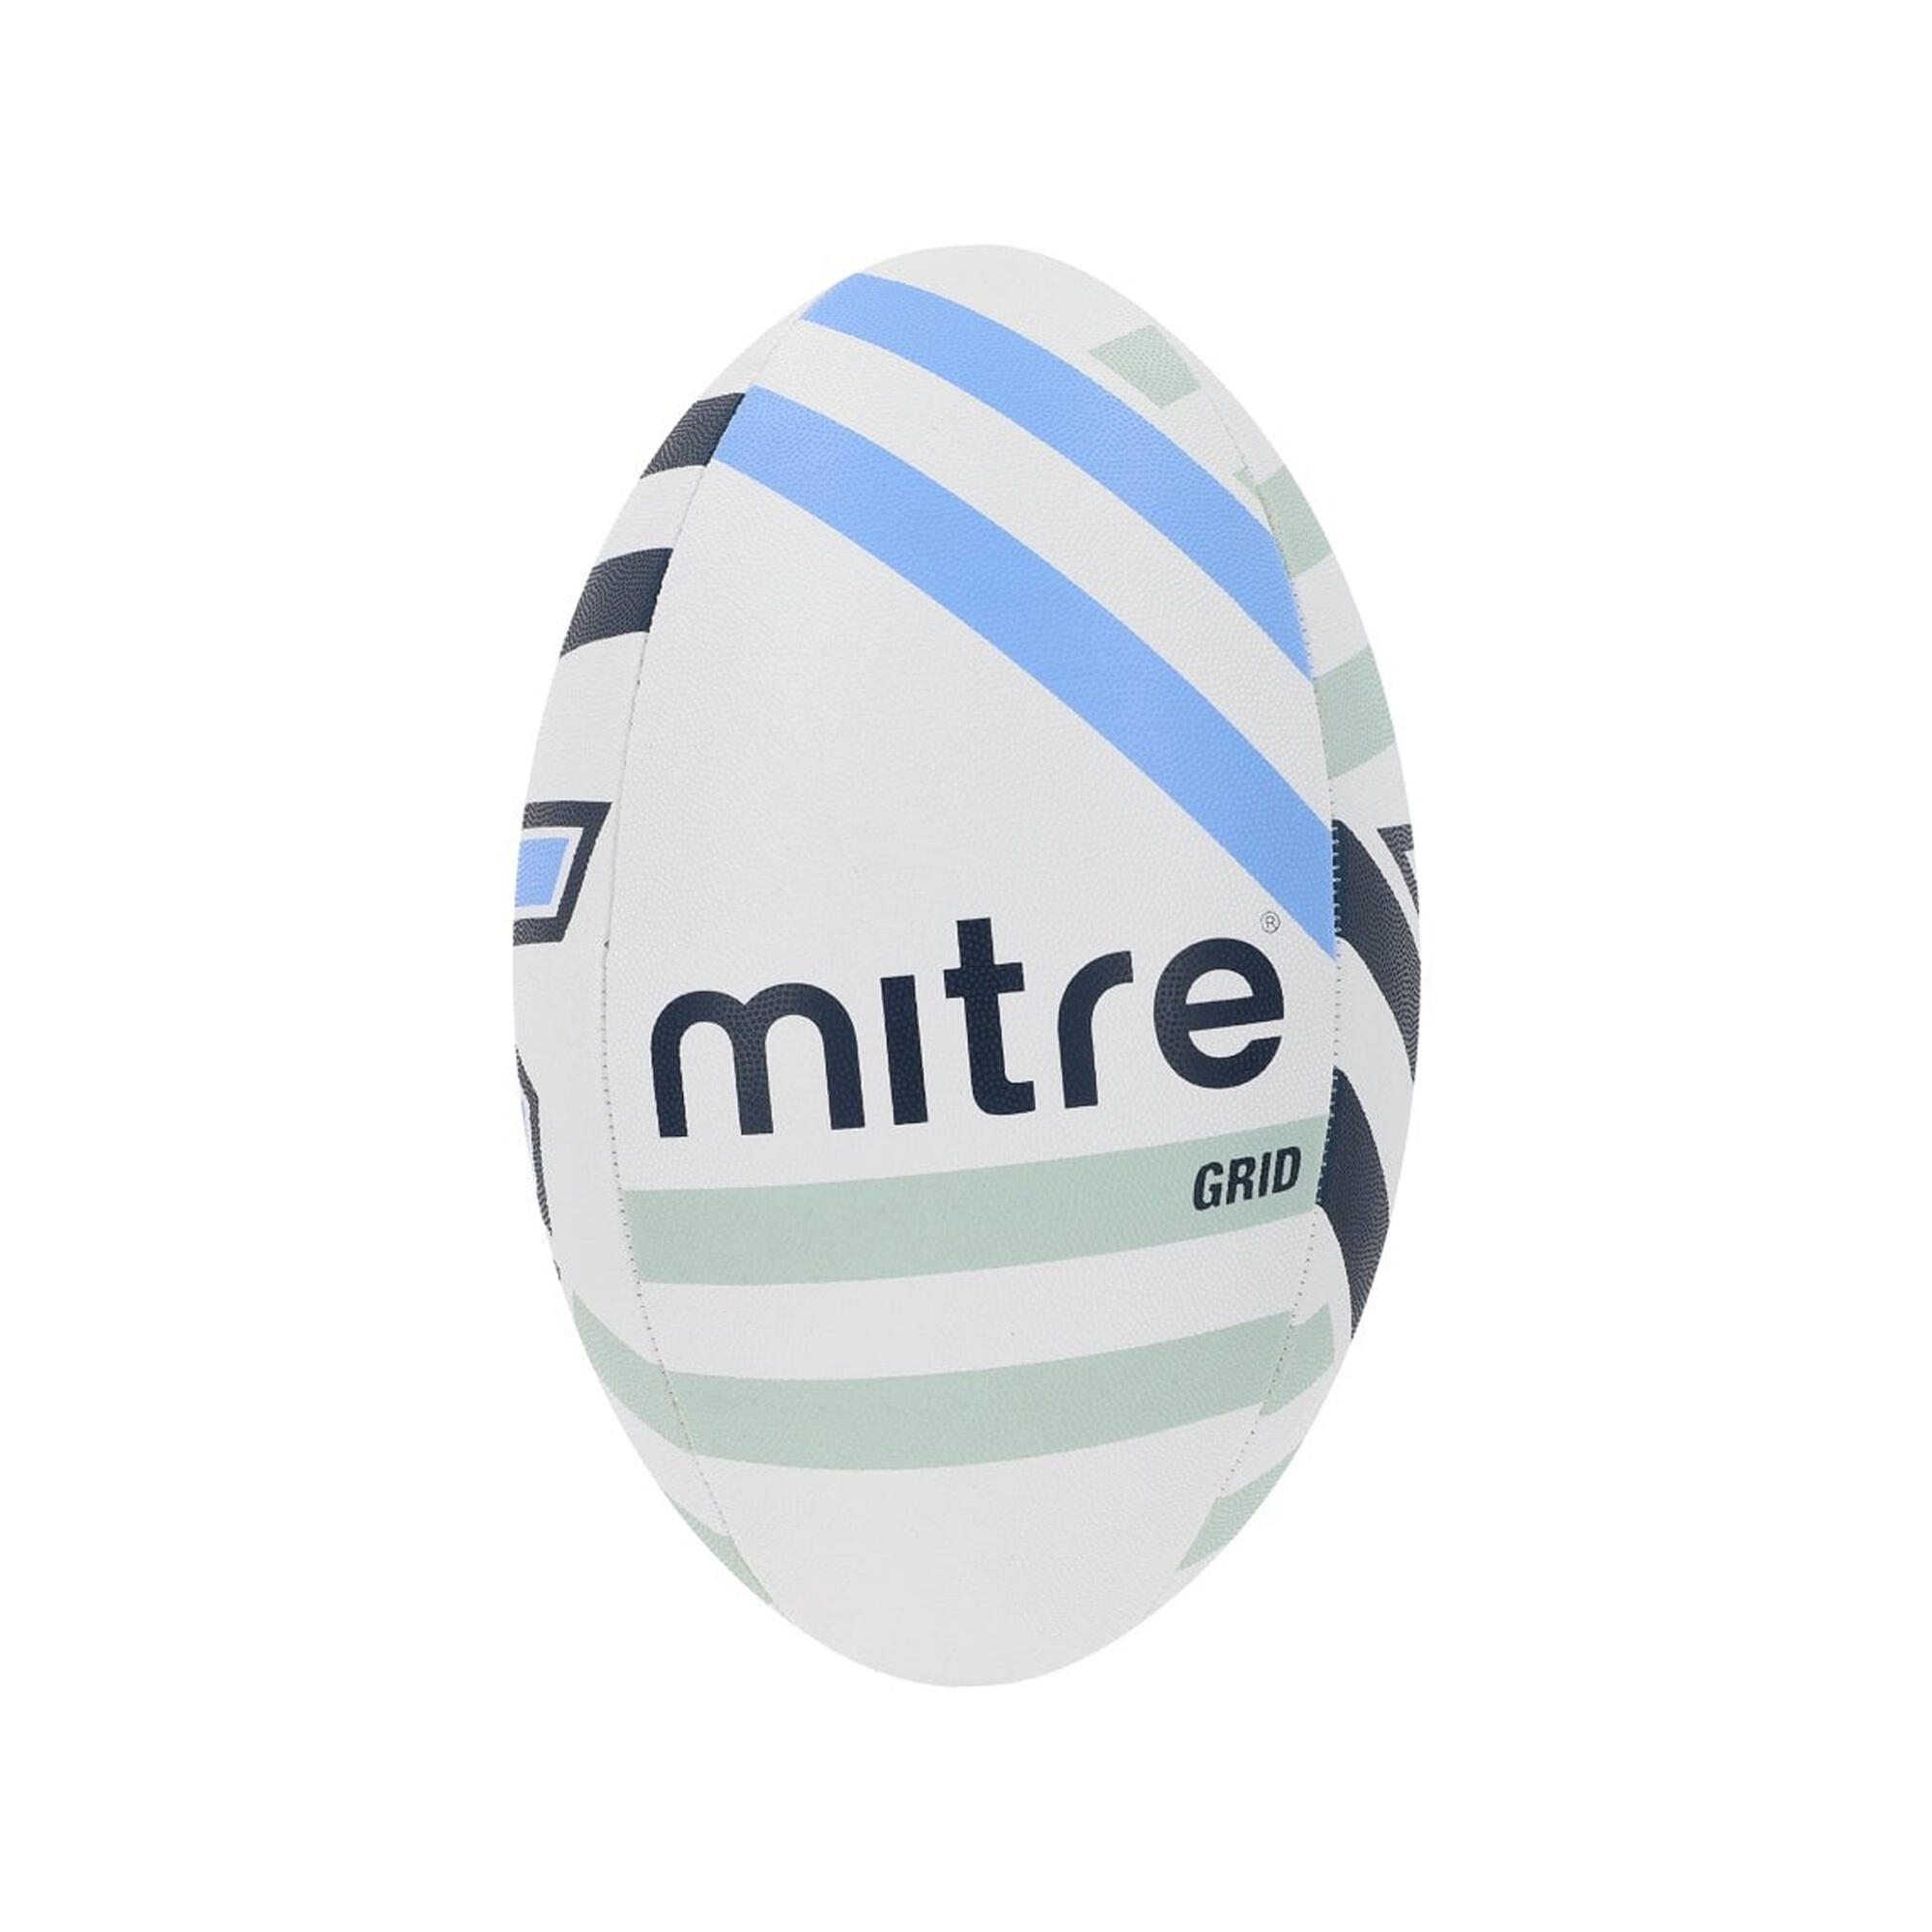 MITRE Grid Rugby Ball (White/Black/Blue)